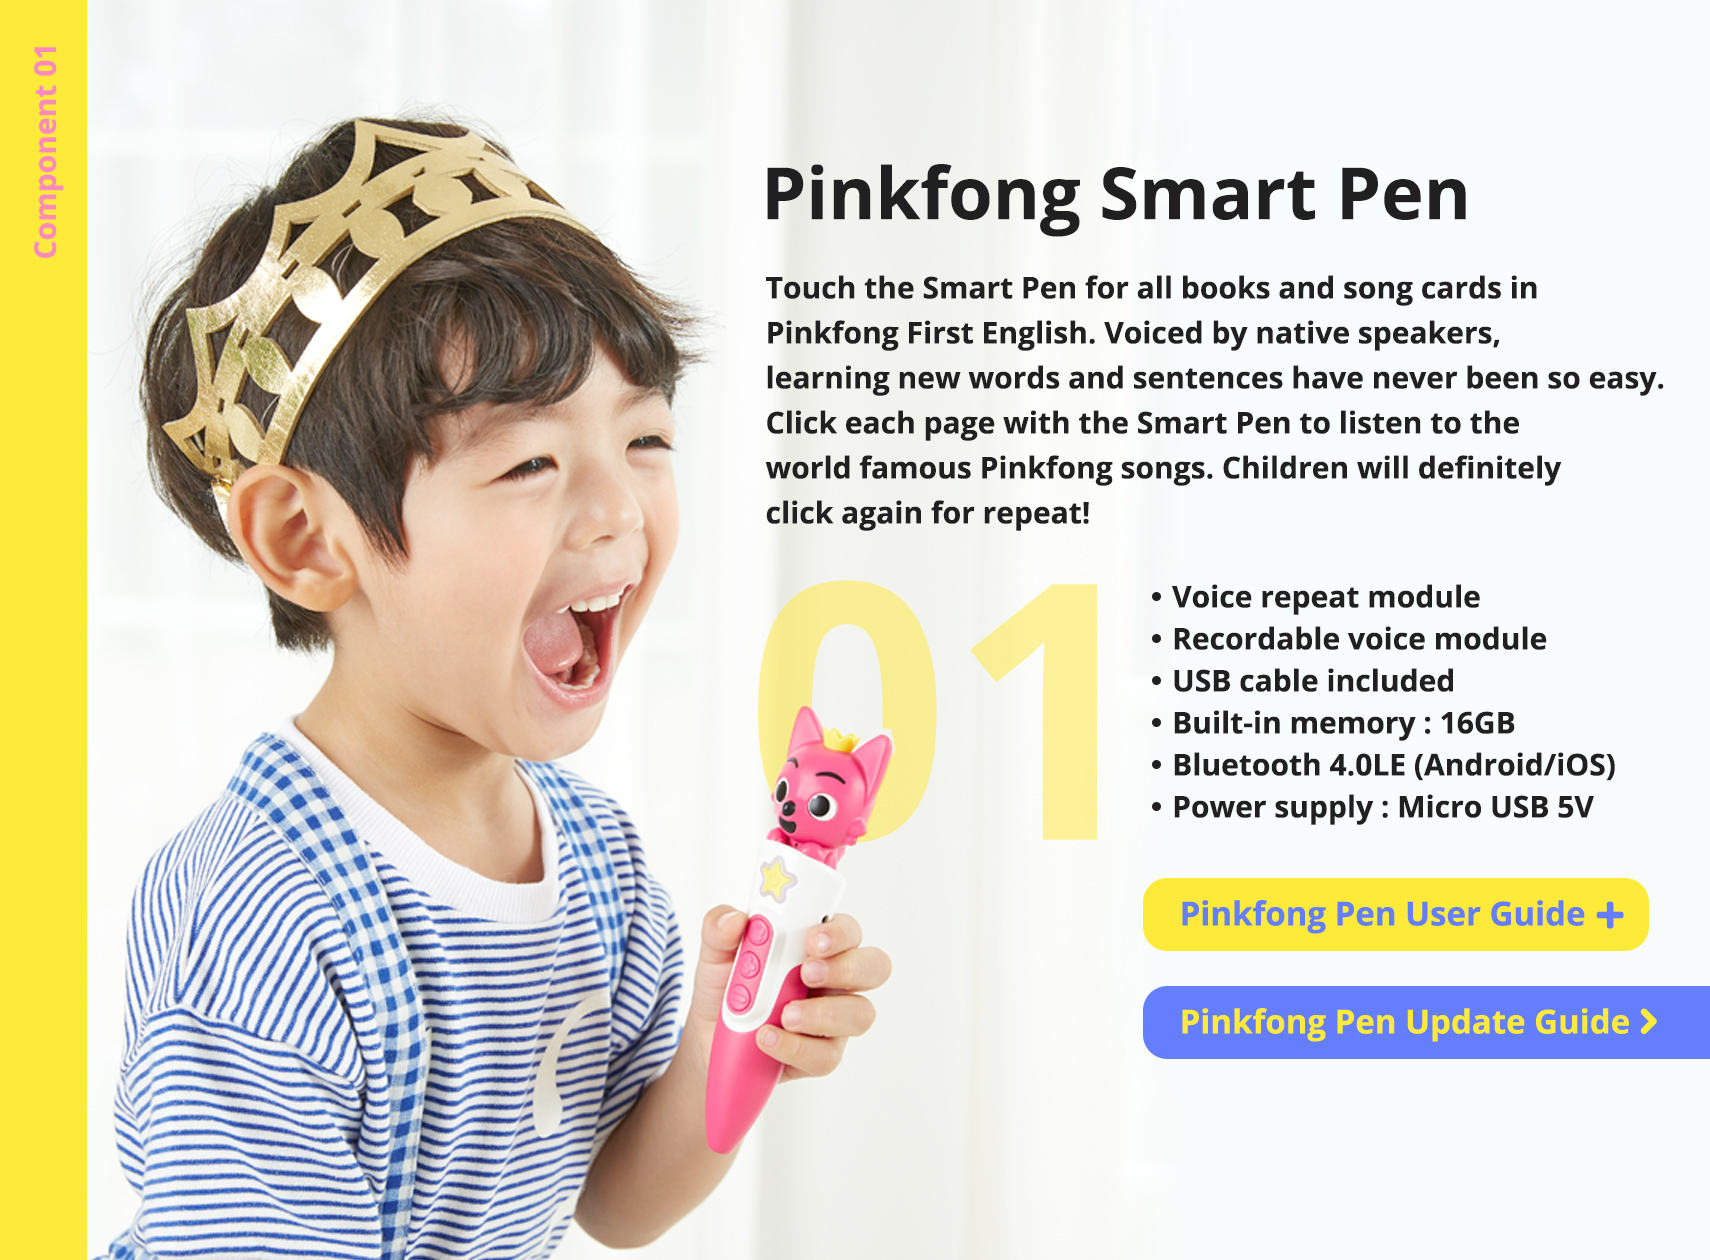 Pinkfong Smart Pen: Touch the Smart Pen for all books and song cards in Pinkfong First English. Voiced by native speakers, learning new words and sentences have never been so easy. Click each page with the Smart Pen to listen to the 
                        world famous Pinkfong songs. Children will definitely click again for repeat!